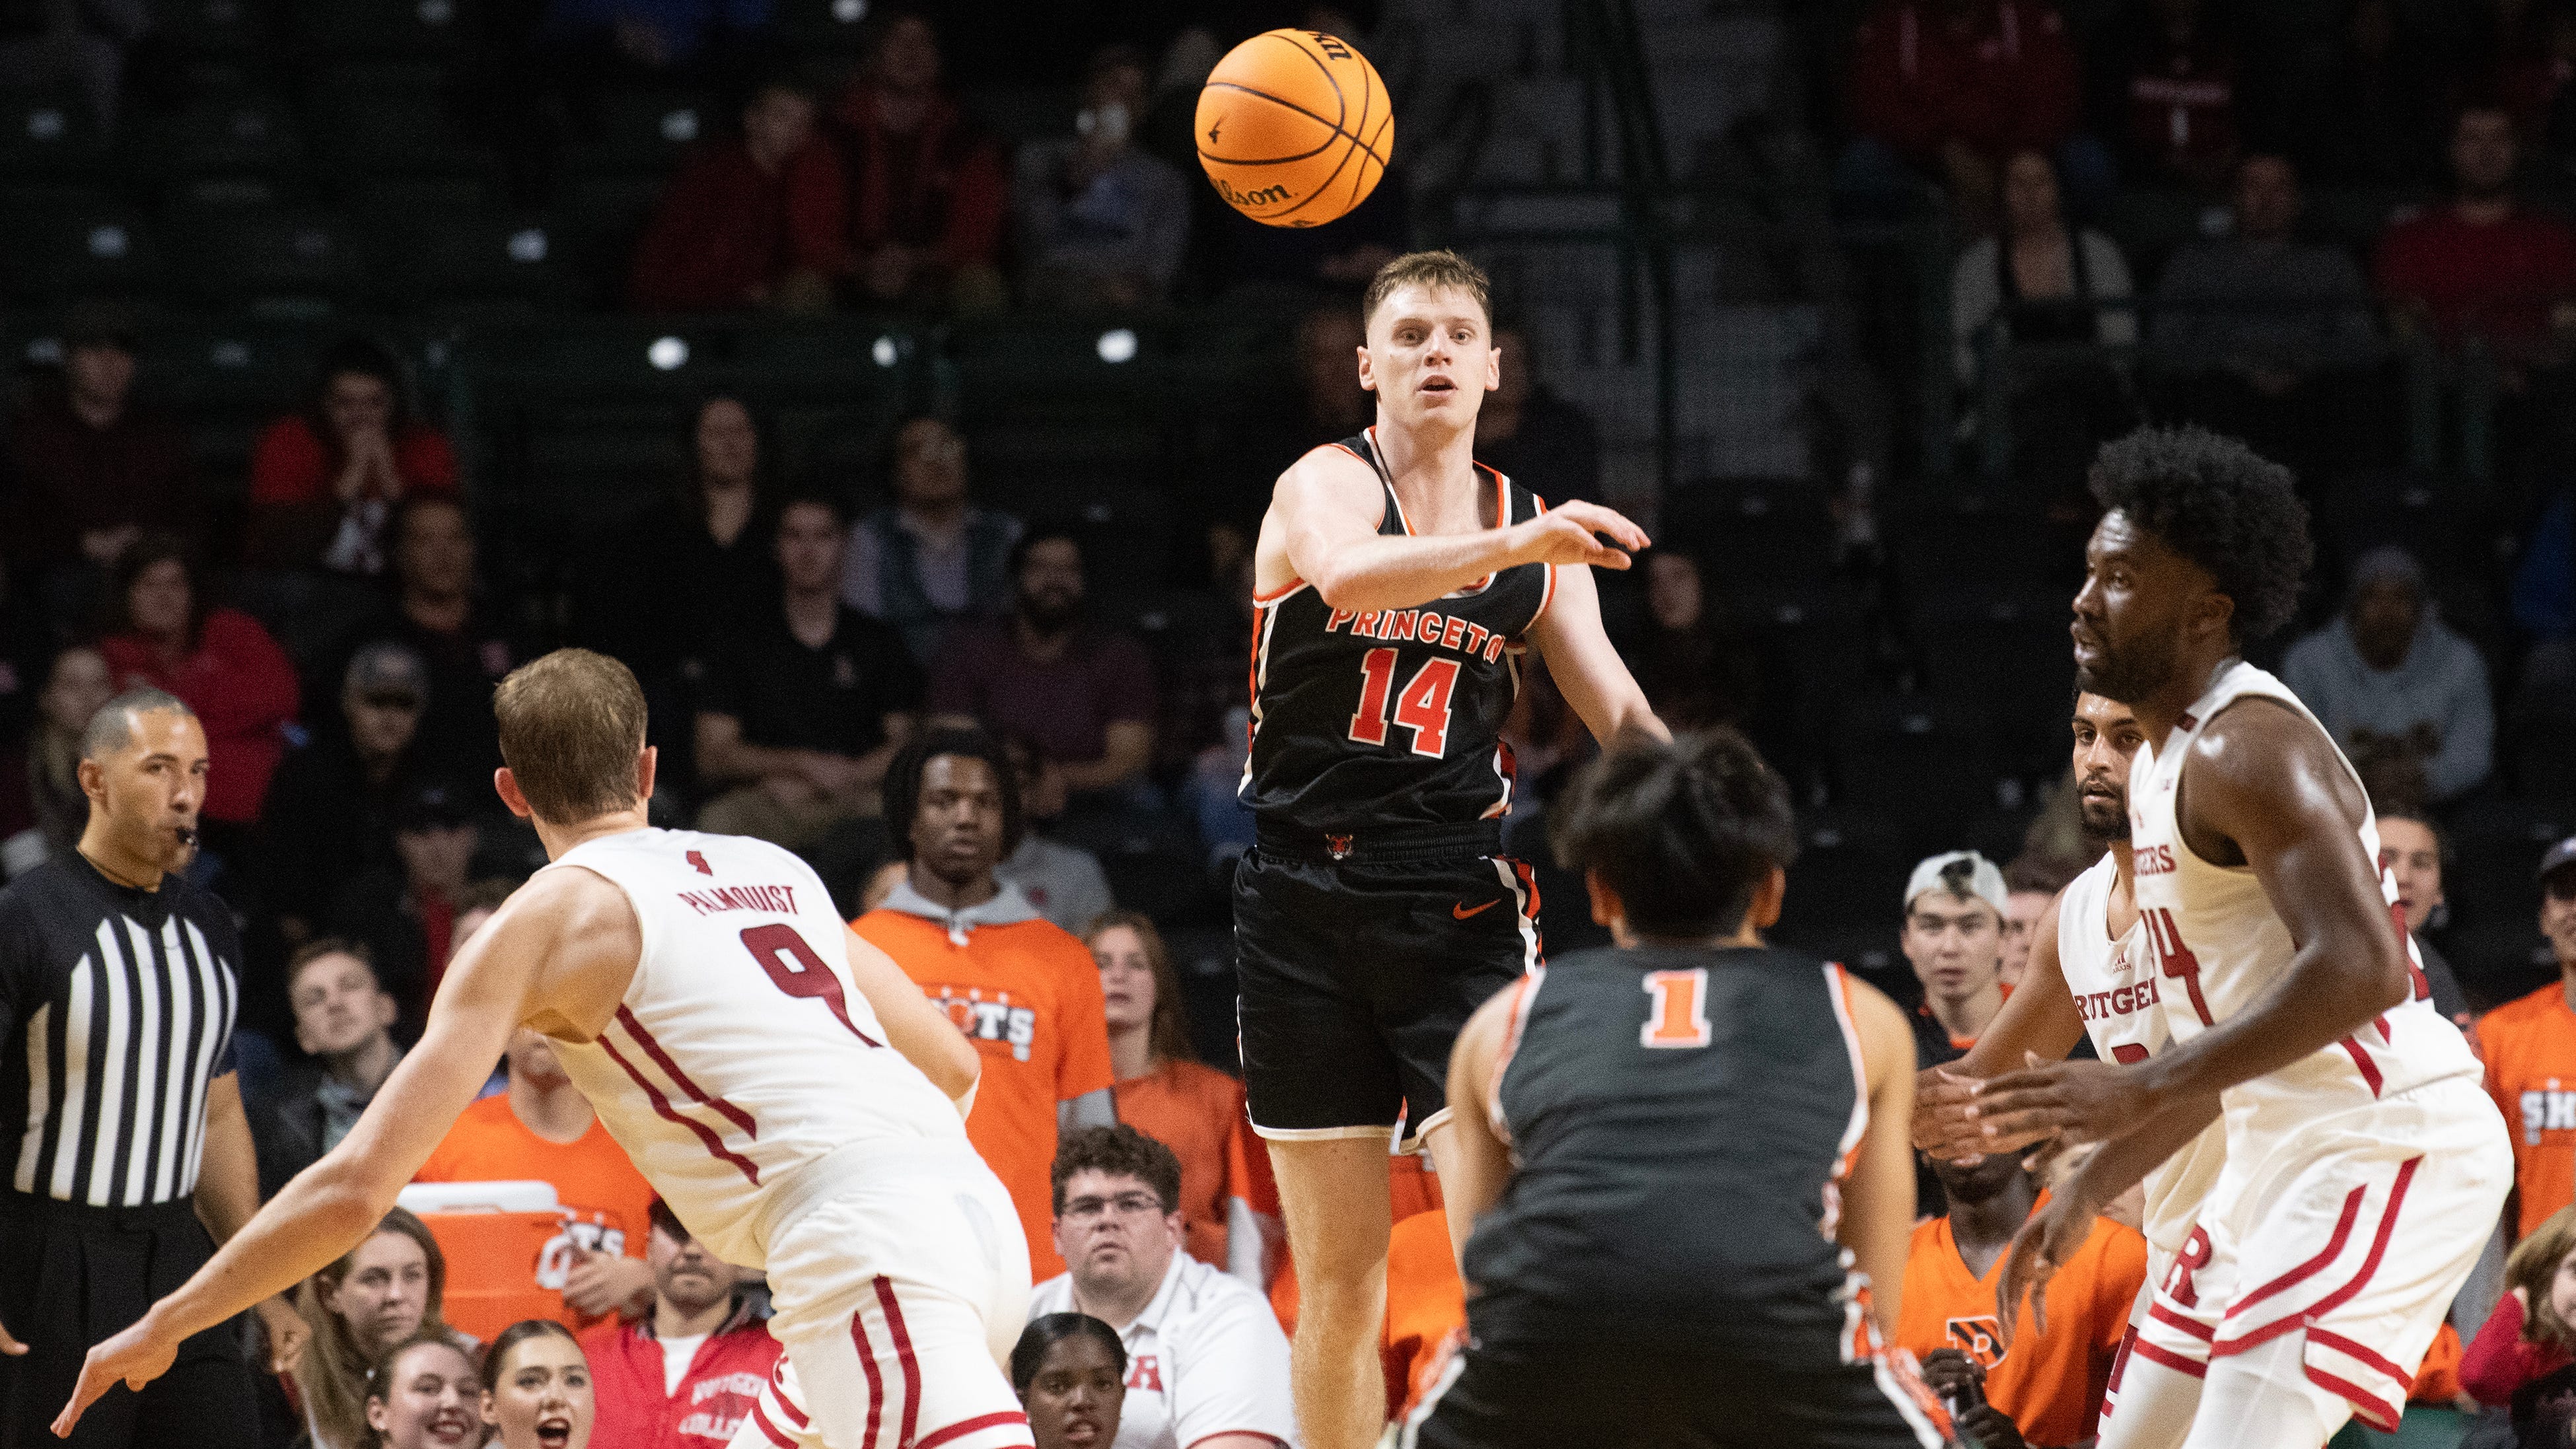 Princeton's Matt Allocco, top, throws a pass during the men's basketball game between Princeton and Rutgers played at the Cure Insurance Arena in Trenton on Monday, November 6, 2023.